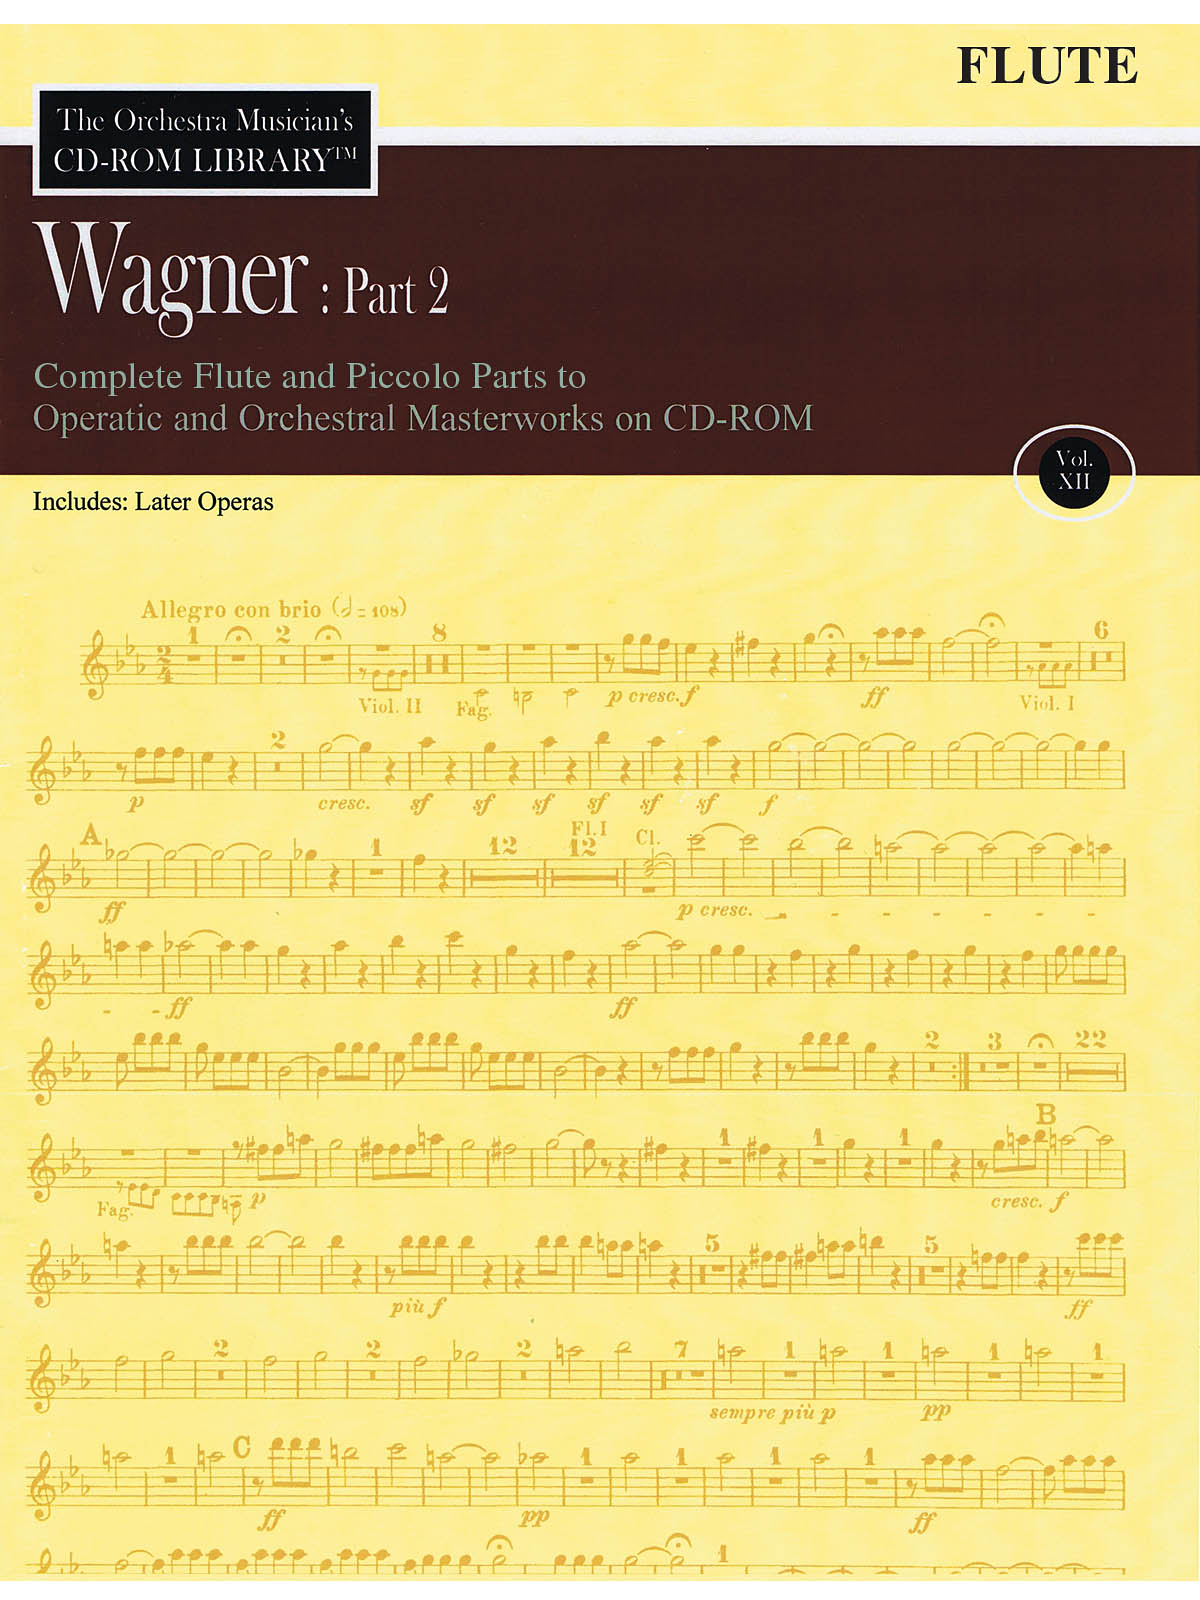 Wagner: Part 2 - Volume 12(The Orchestra Musician's CD-ROM Library - Flute)